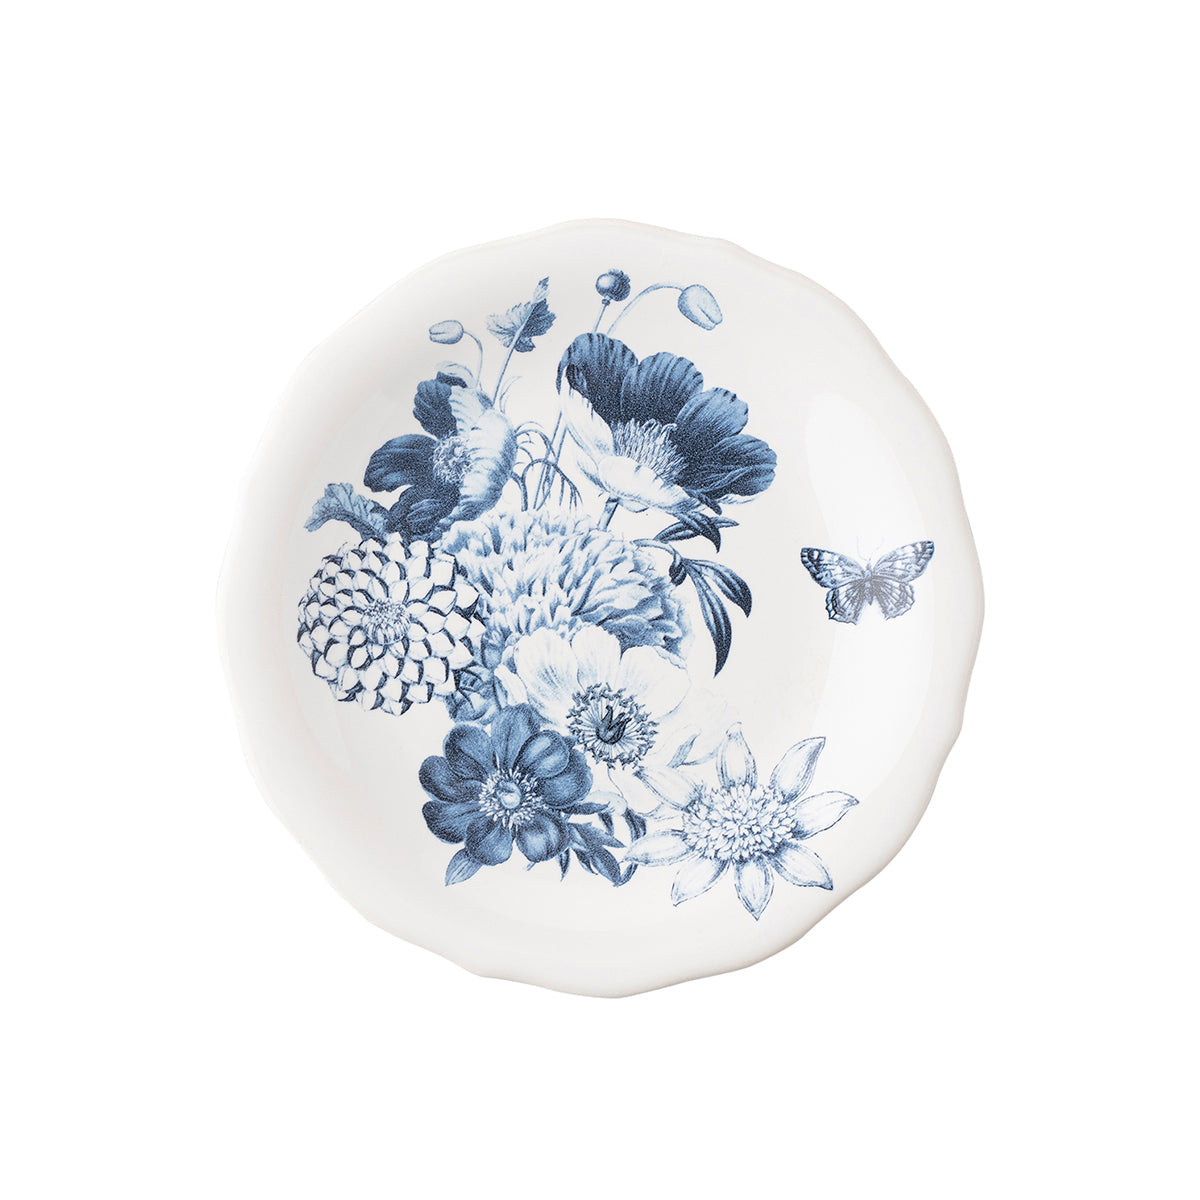 Festooned with a burst of elegant florals and a single butterfly, in soft shades of chambray blue, this dish is perfectly sized for nibbles and sides. The subtly scalloped rim gives it a feminine silhouette that makes it equally lovely as a layering piece or on its own. 